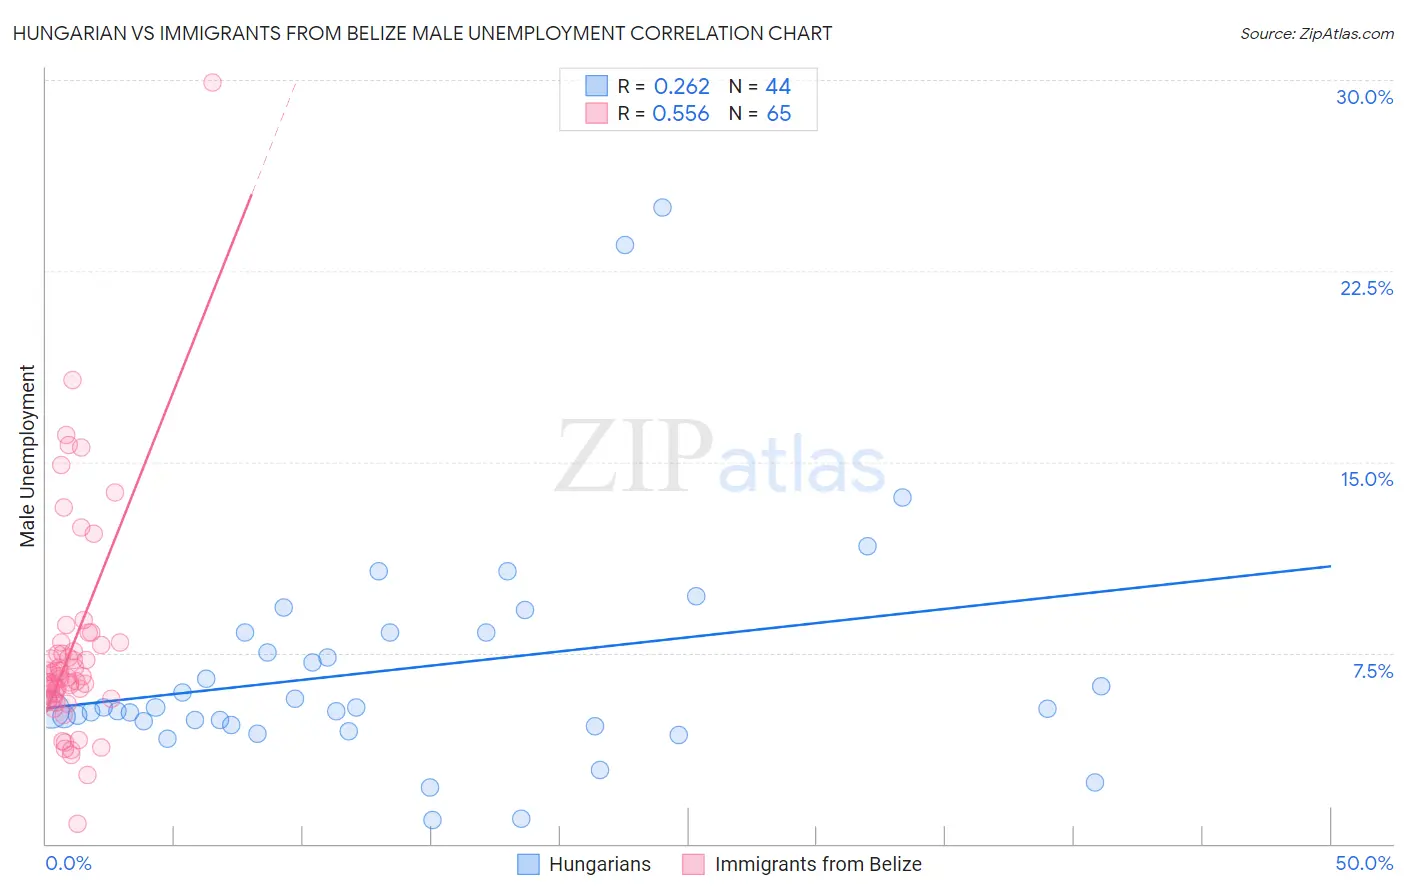 Hungarian vs Immigrants from Belize Male Unemployment